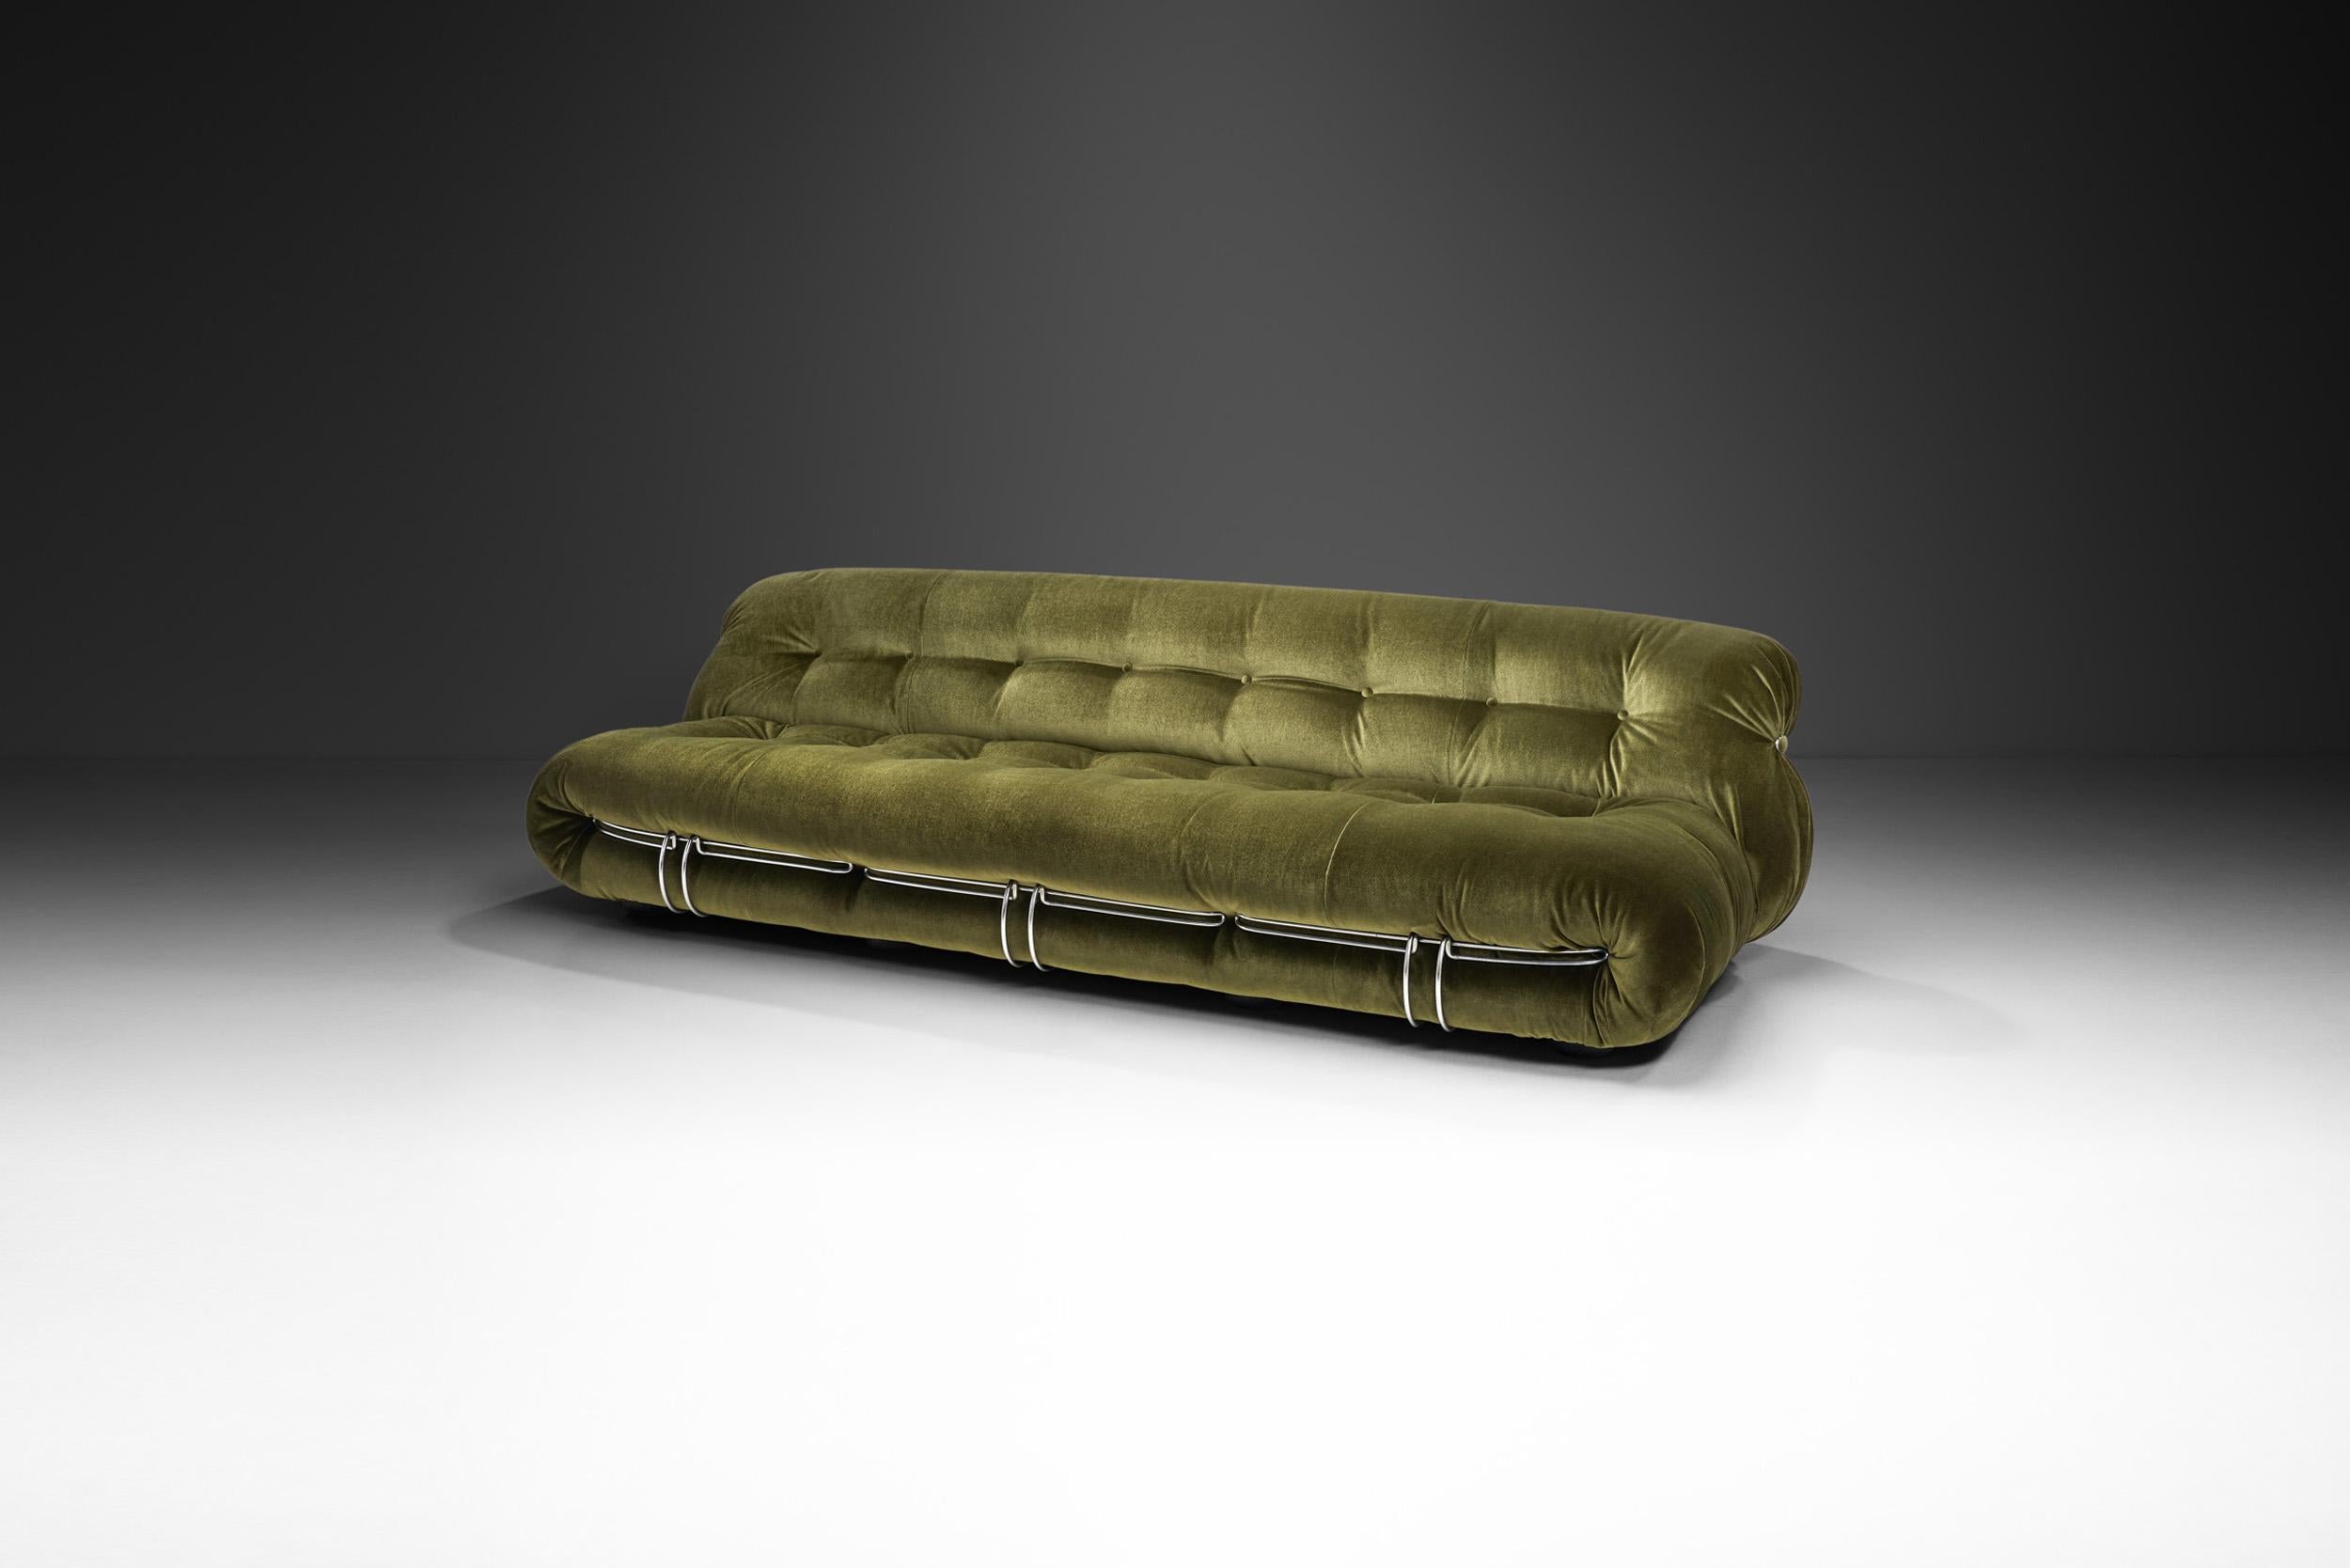 The iconic “Soriana” three-seater sofa was designed by the Italian designer duo, Afra and Tobia Scarpa in 1969. Besides its innovative manufacturing, visually, Soriana brings sophisticated and leisurely comfort to any home.

This post-modern sofa